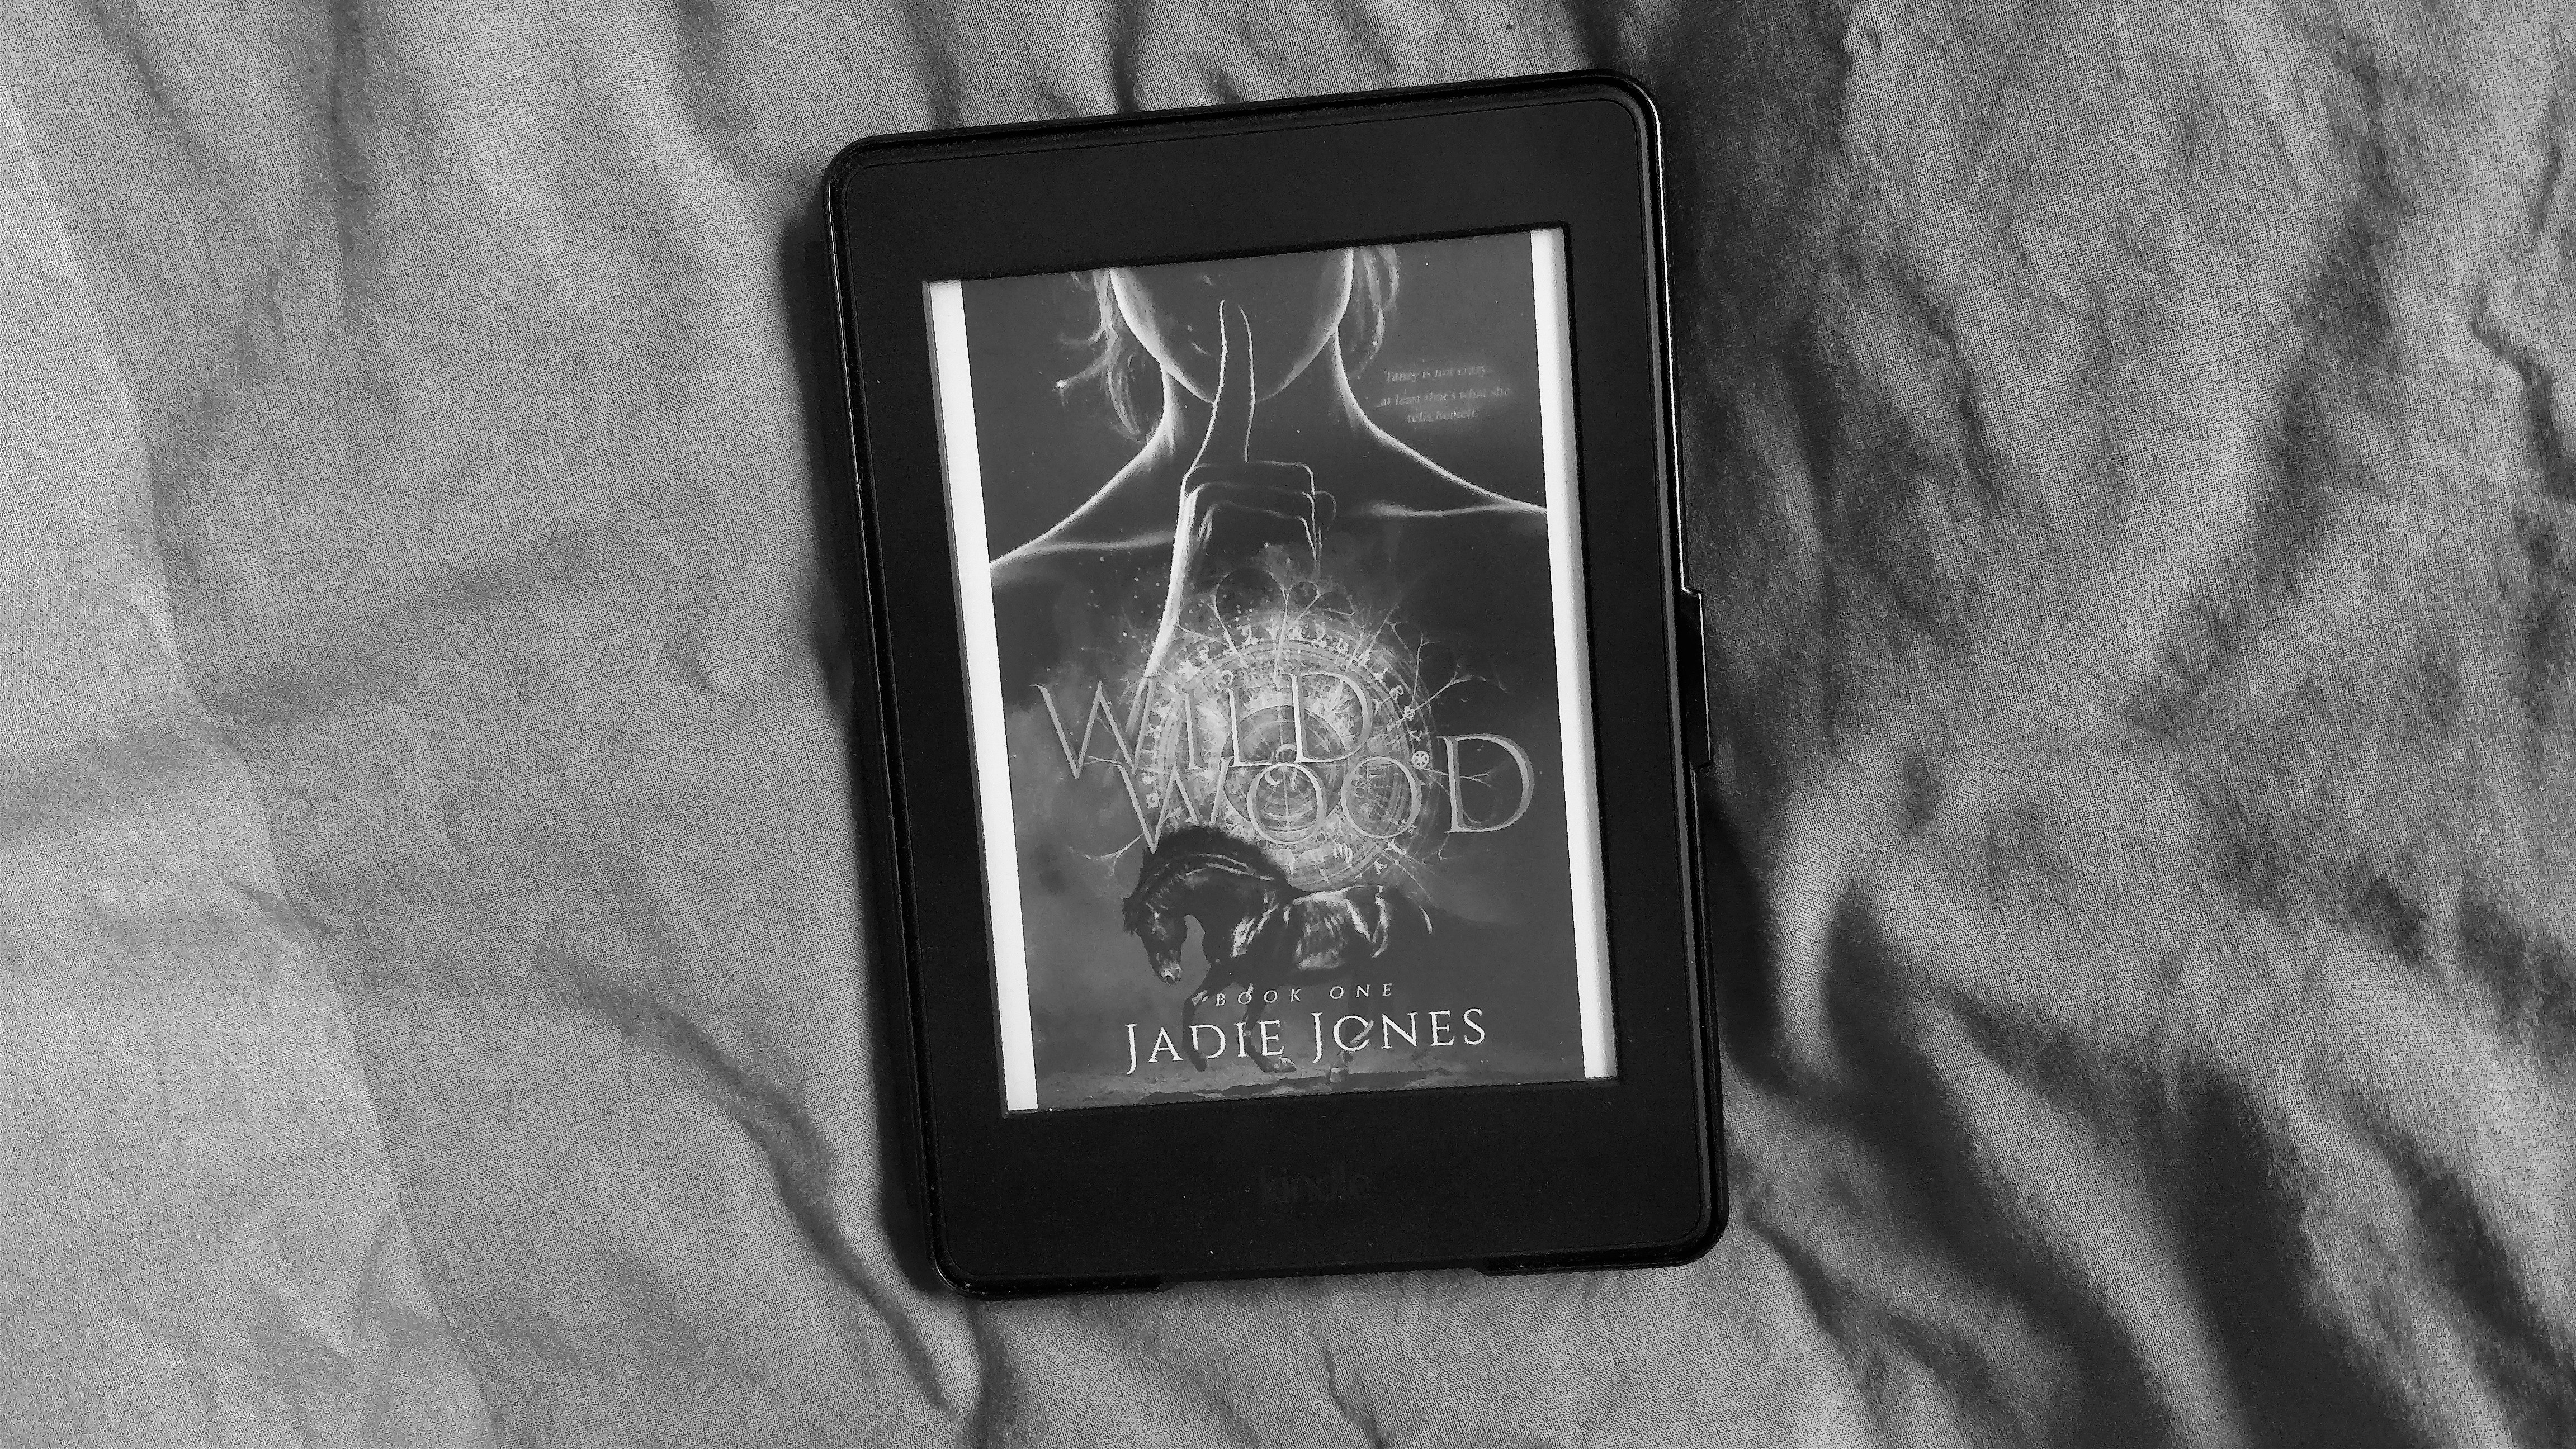 The Kindle verison of Wildwood's cover in black and white